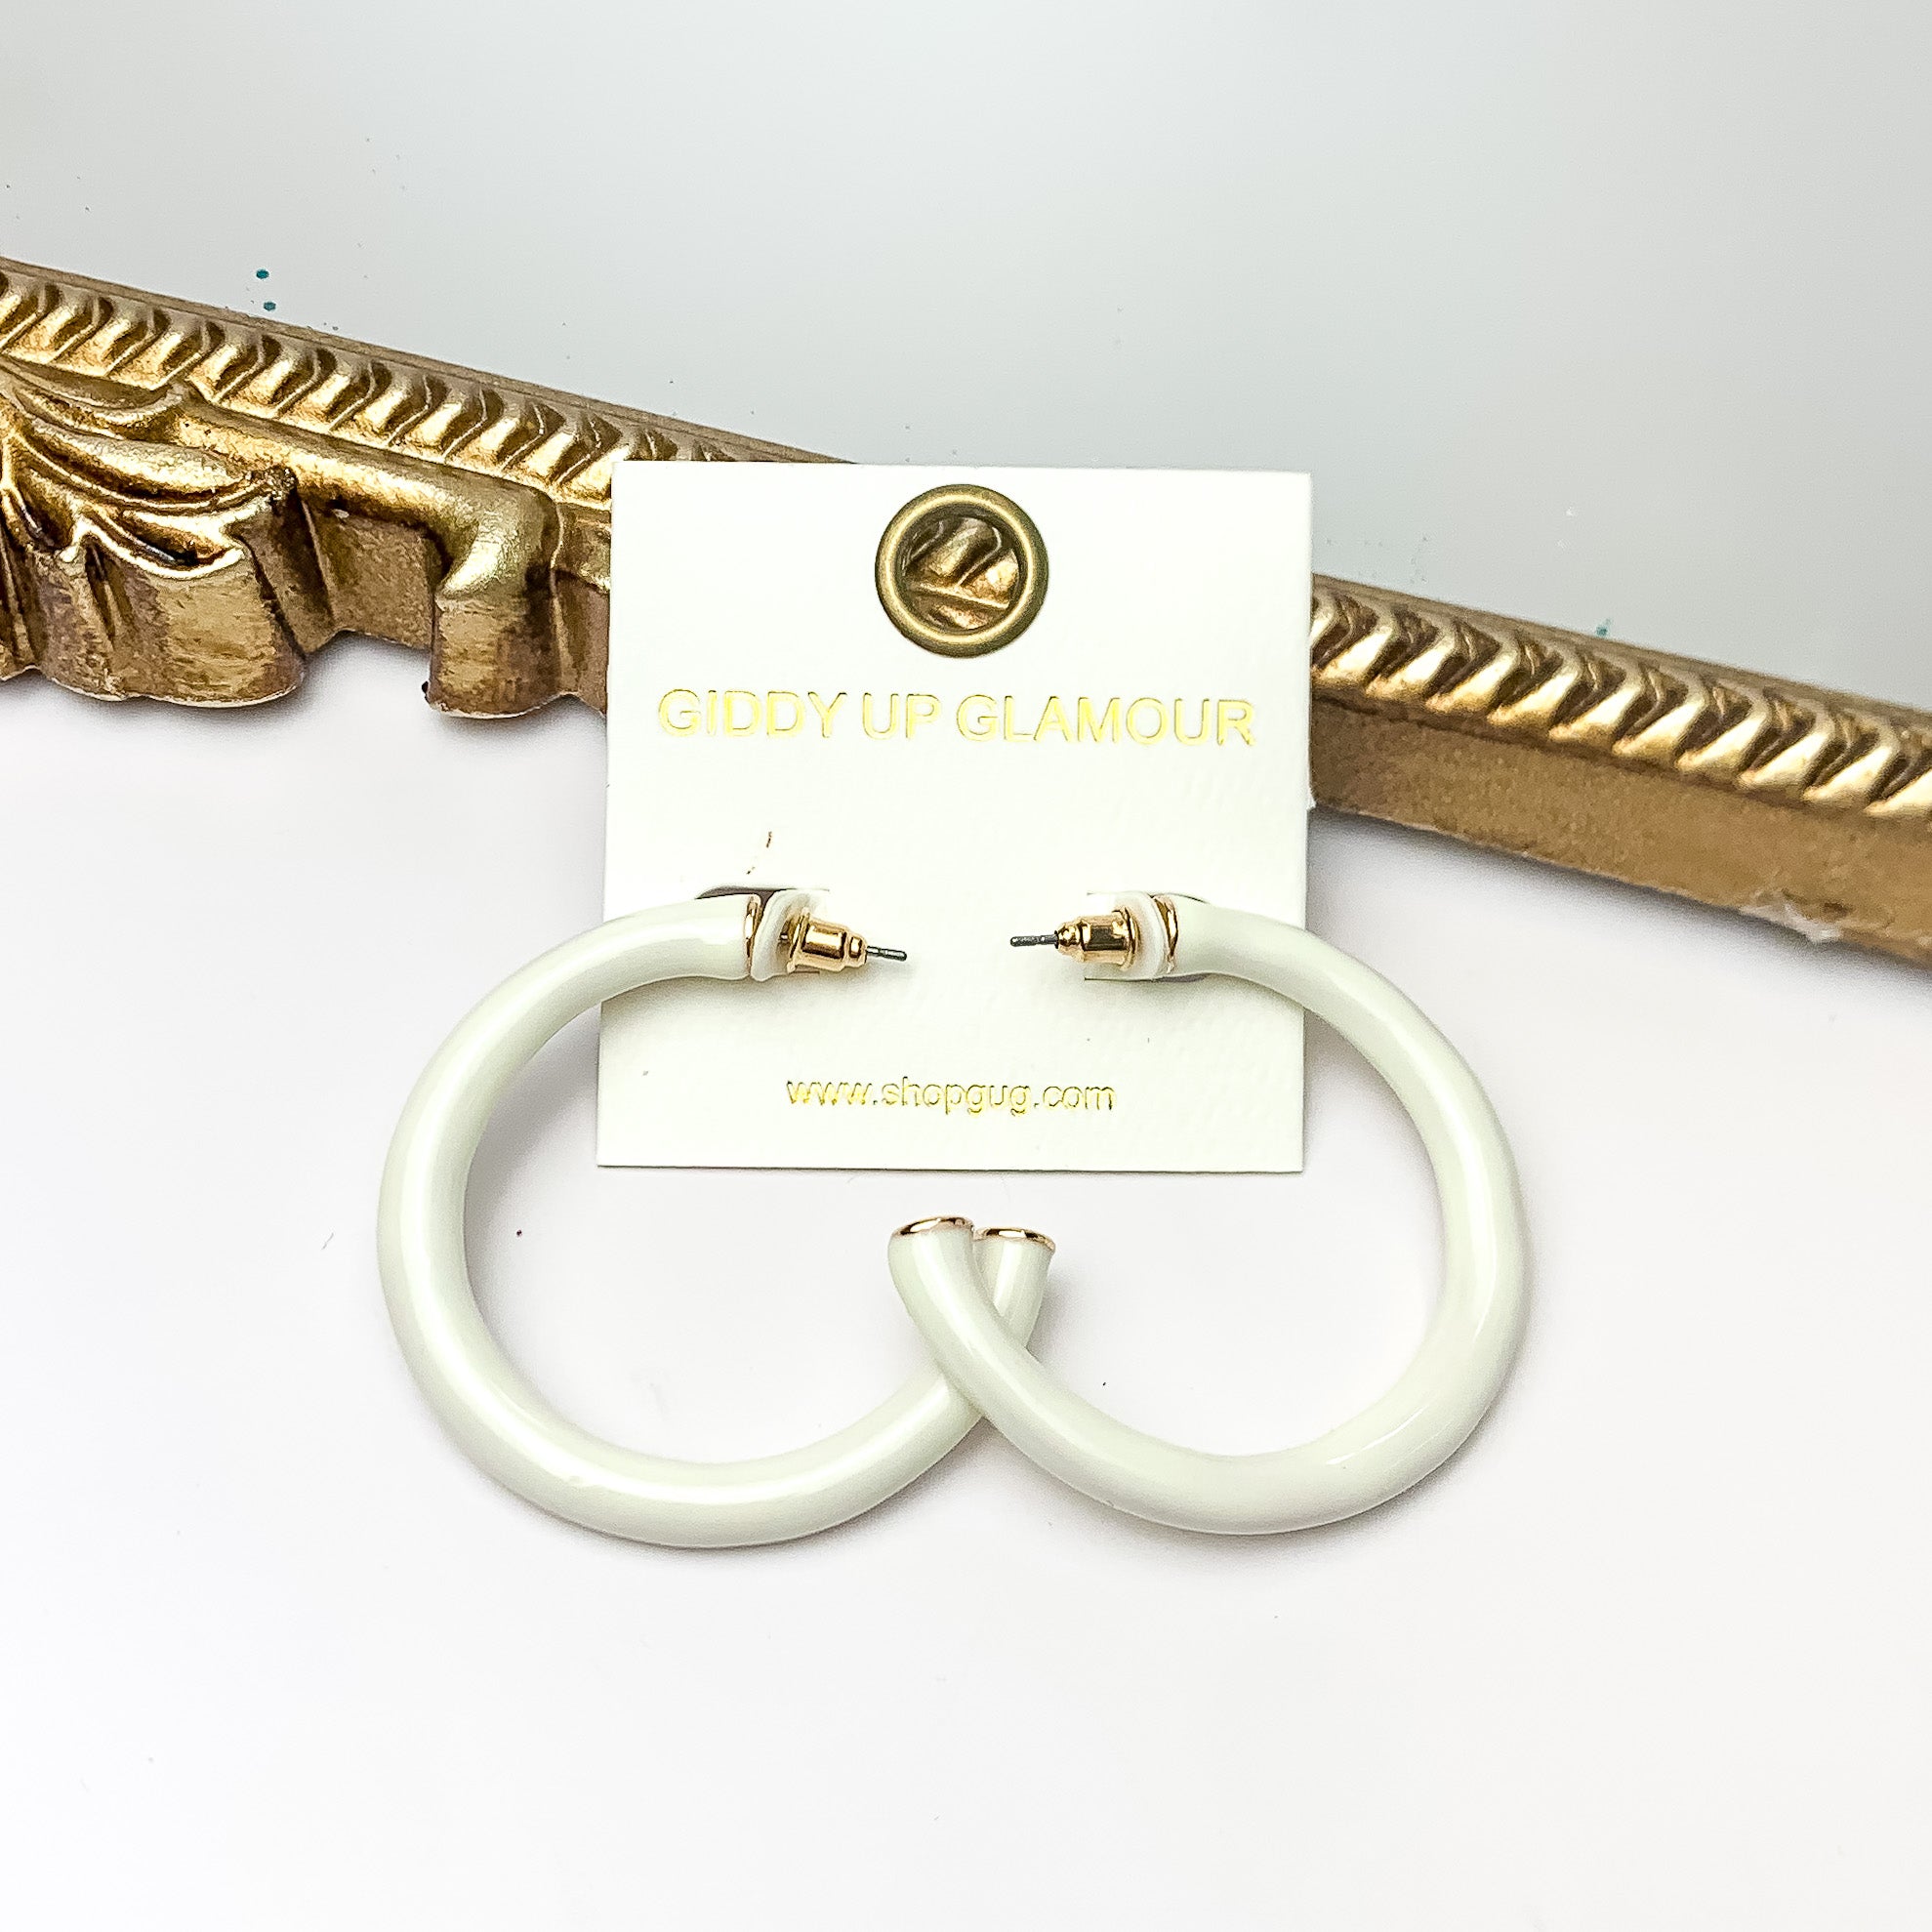 Plan For Cabo Large Hoop Earrings in Ivory. Pictured on a white background with a gold frame behind the earrings.